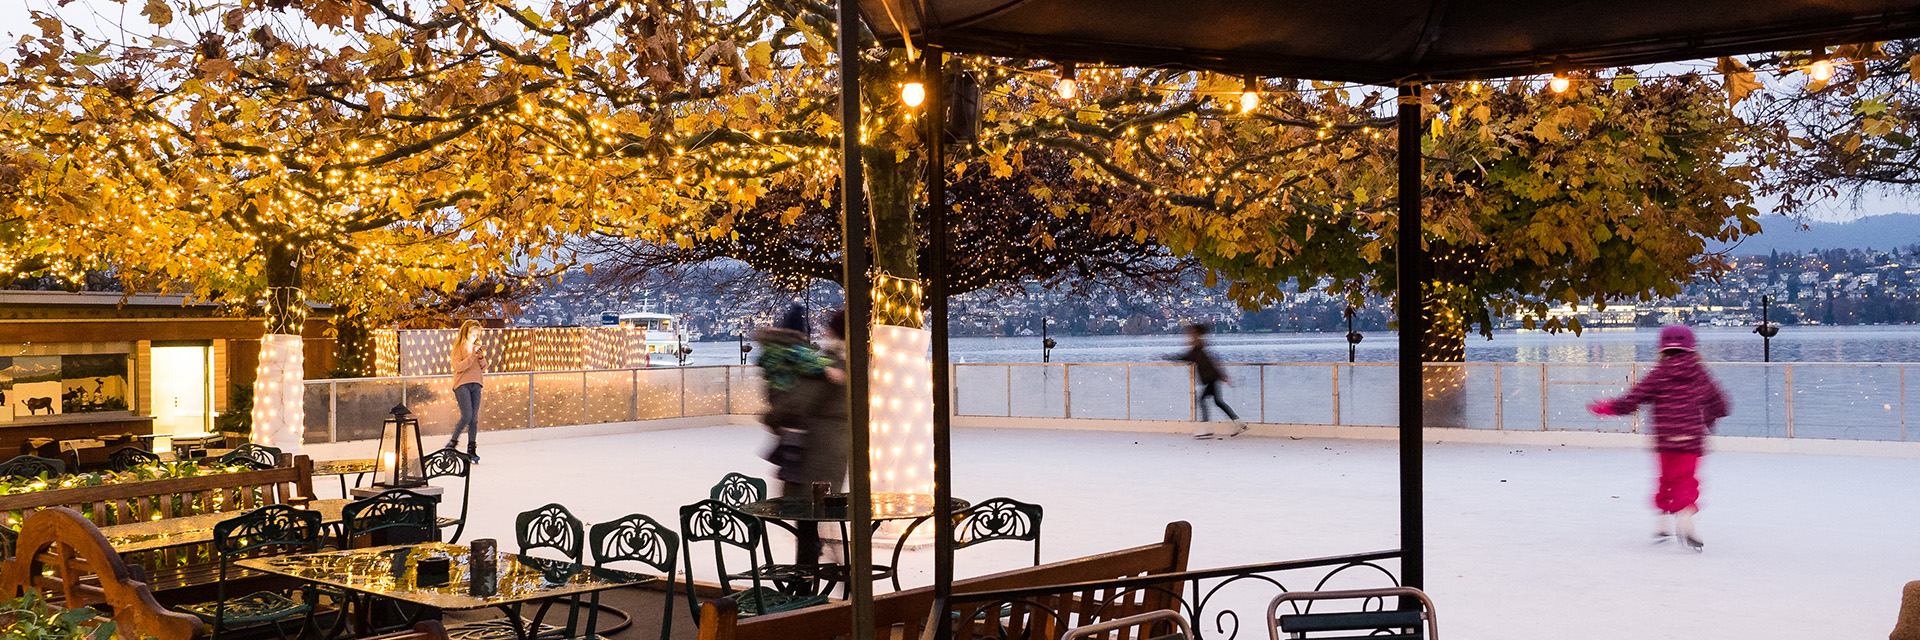 «Live on Ice» – the romantic ice rink in Küsnacht by Lake Zurich